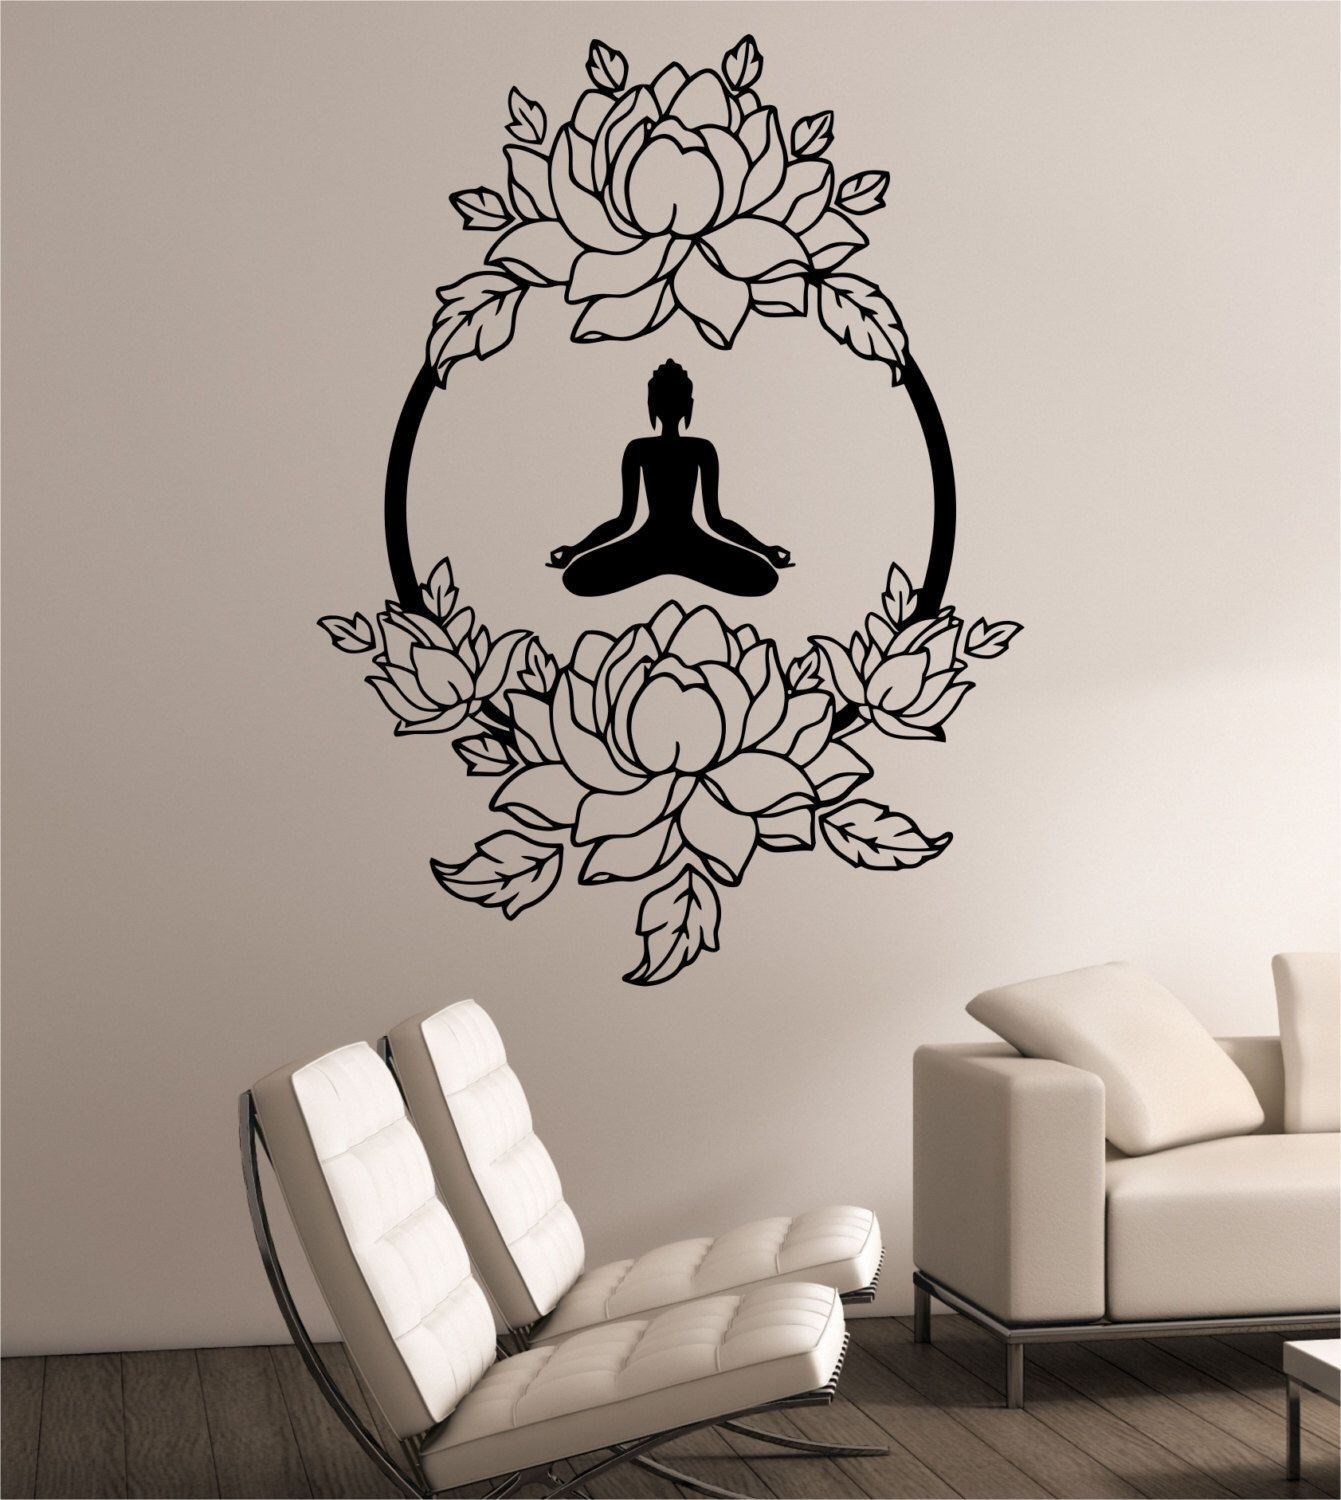 Wall Decal Luxury 1 Kirkland Wall Decor Home Design 0d Outdoor Design Wall Decals for